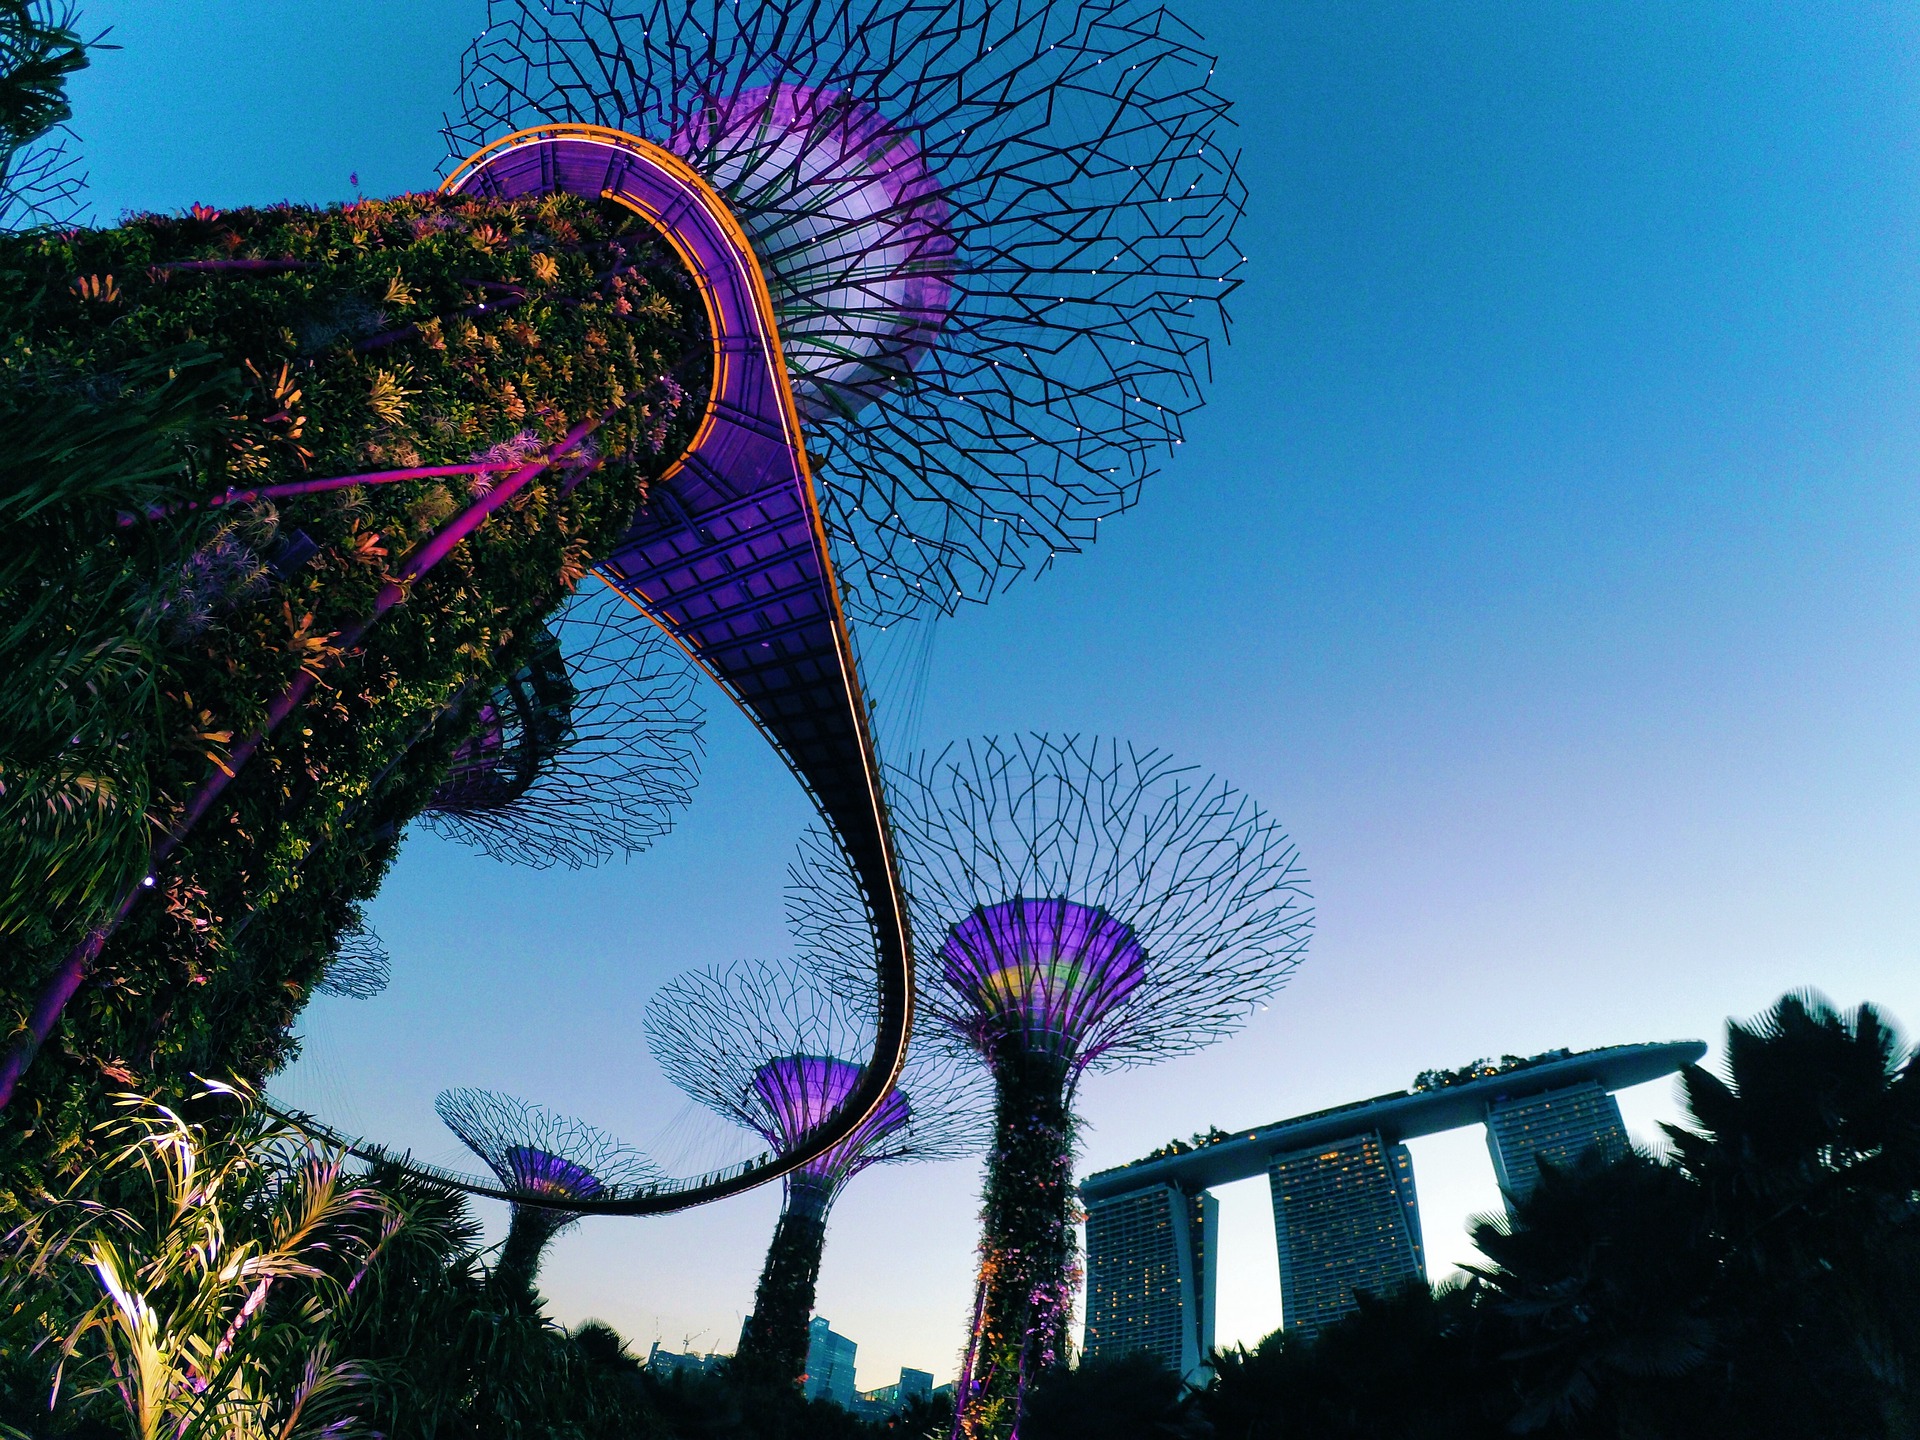 Gardens by the Bay and Marina Bay Sands, Singapore